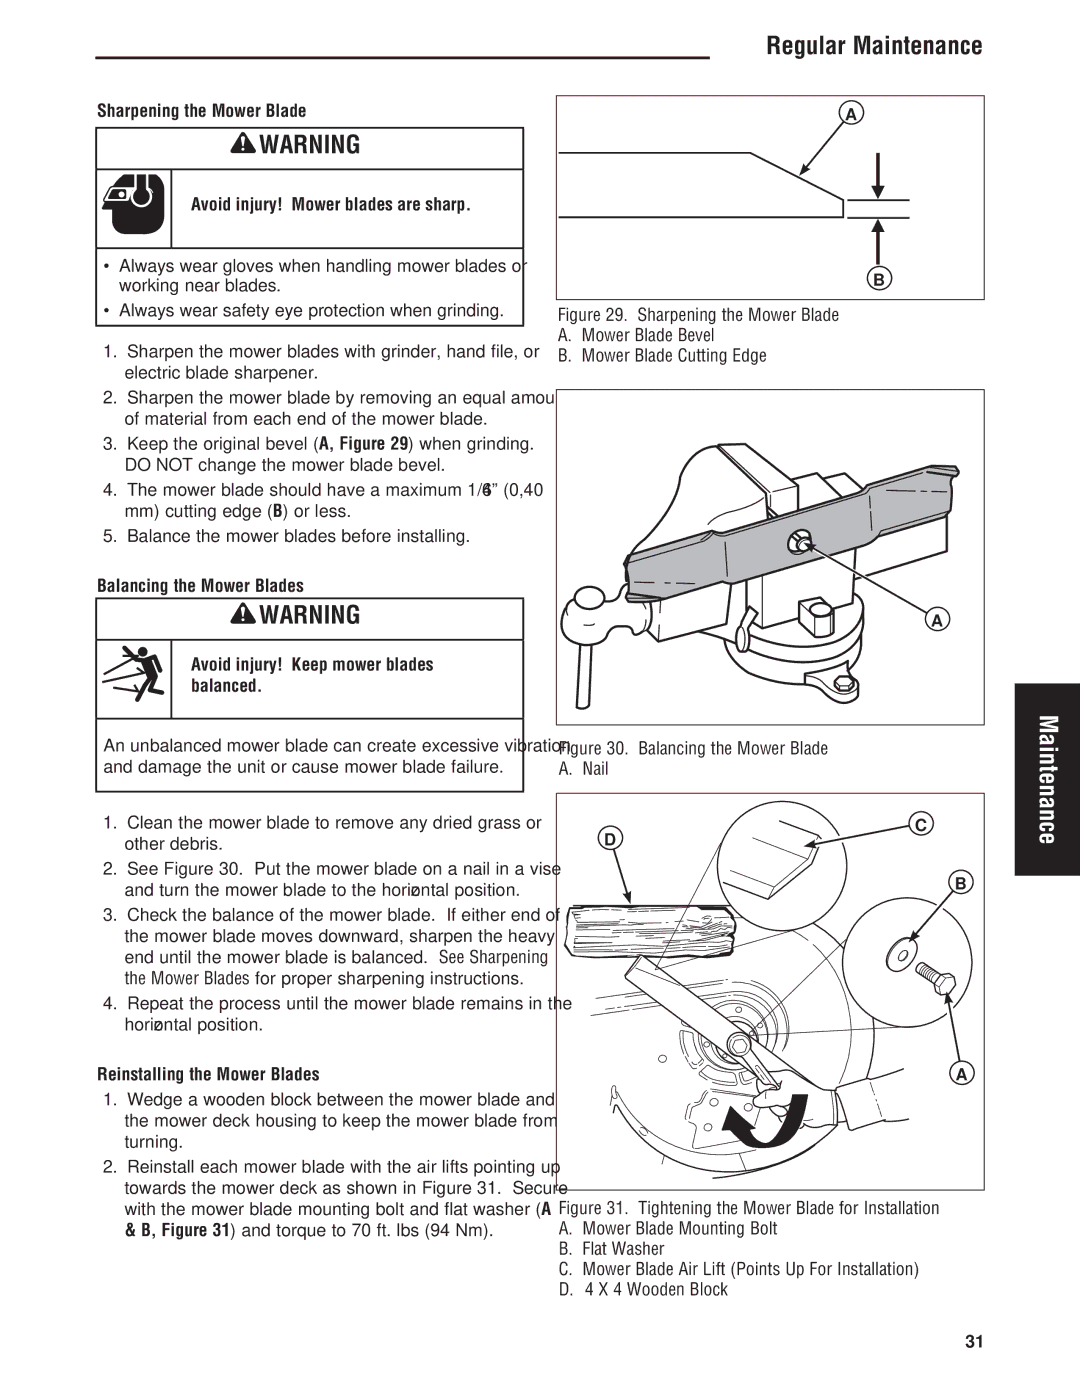 Simplicity Cobalt Series manual Reinstalling the Mower Blades, Specifications 